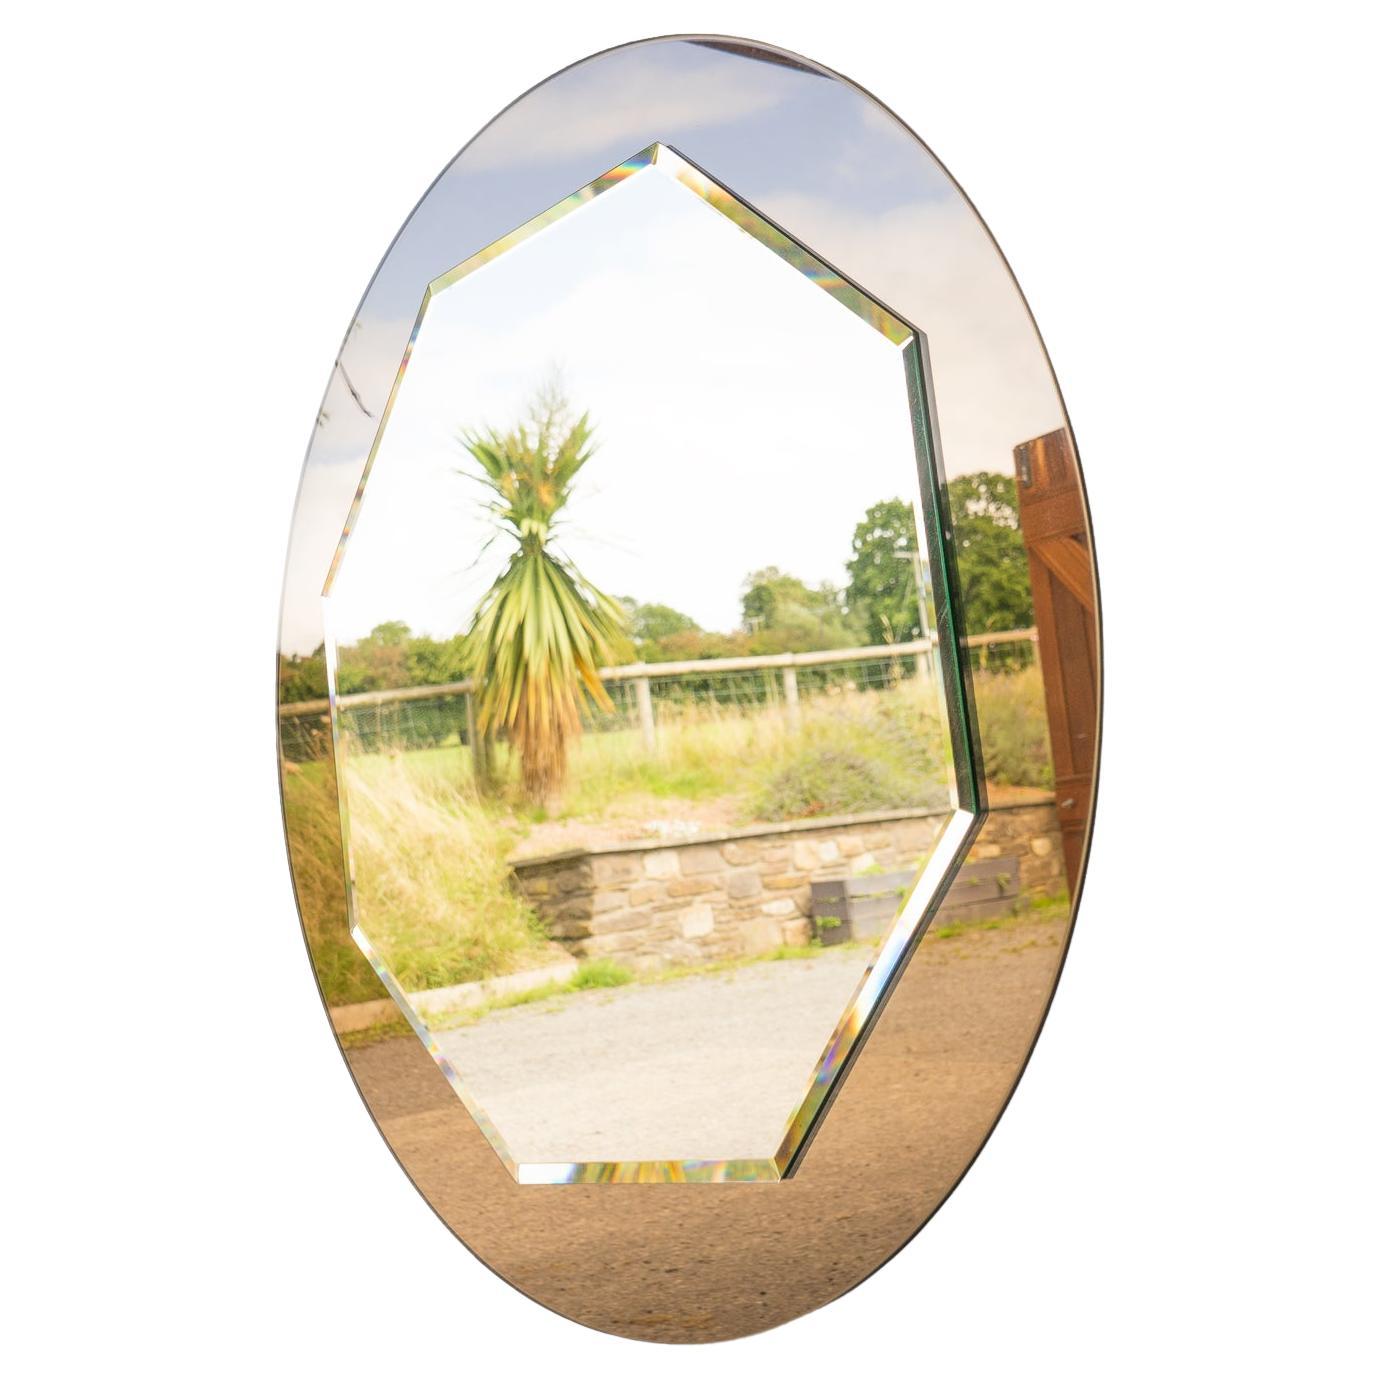 Large Vintage Italian Rose Tinted Circular Wall Mirror With Octagonal Bevelled Mirror Plate, C. 1970s

A large frameless circular rose-tinted mirror with an internal octagonal mirror.

Originating from Italy and dating from the 1970s-1980s